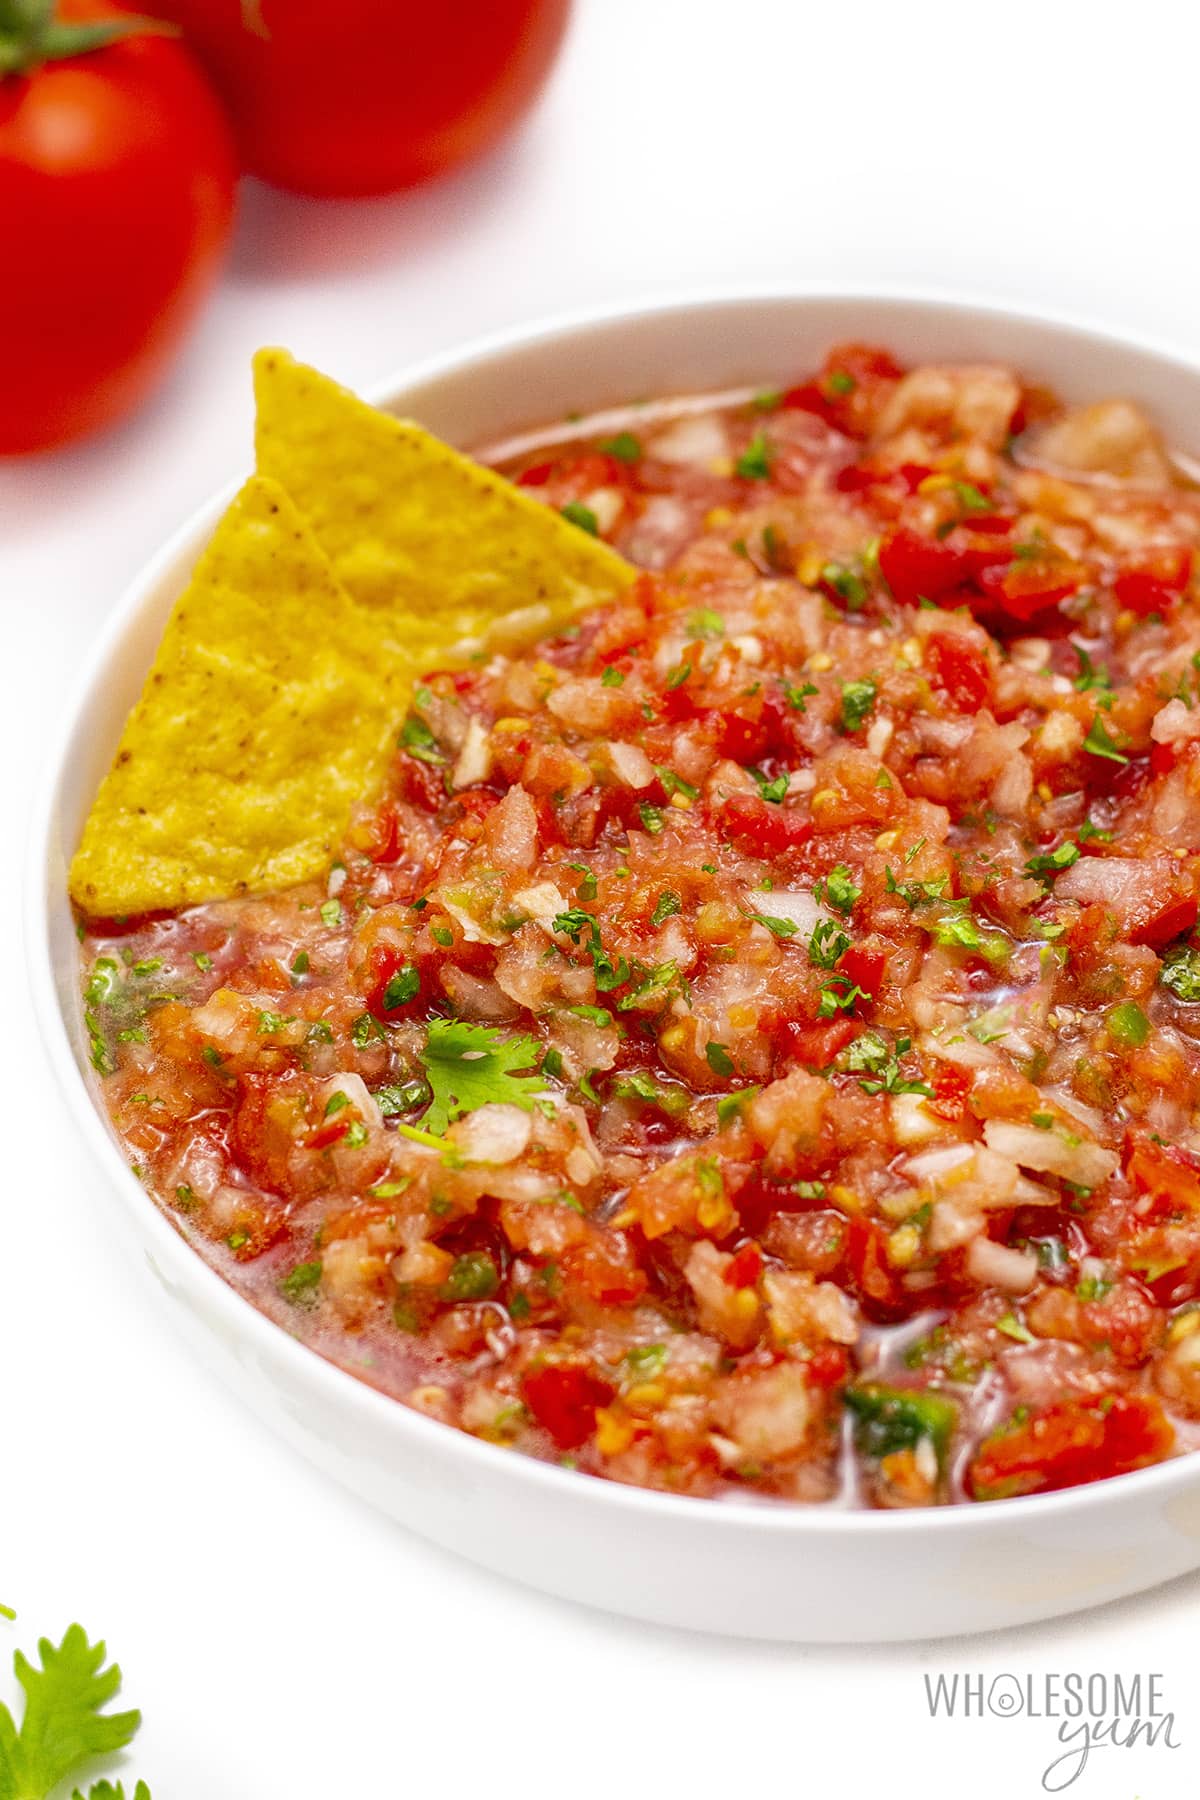 Homemade salsa recipe with two tortilla chips dipped.